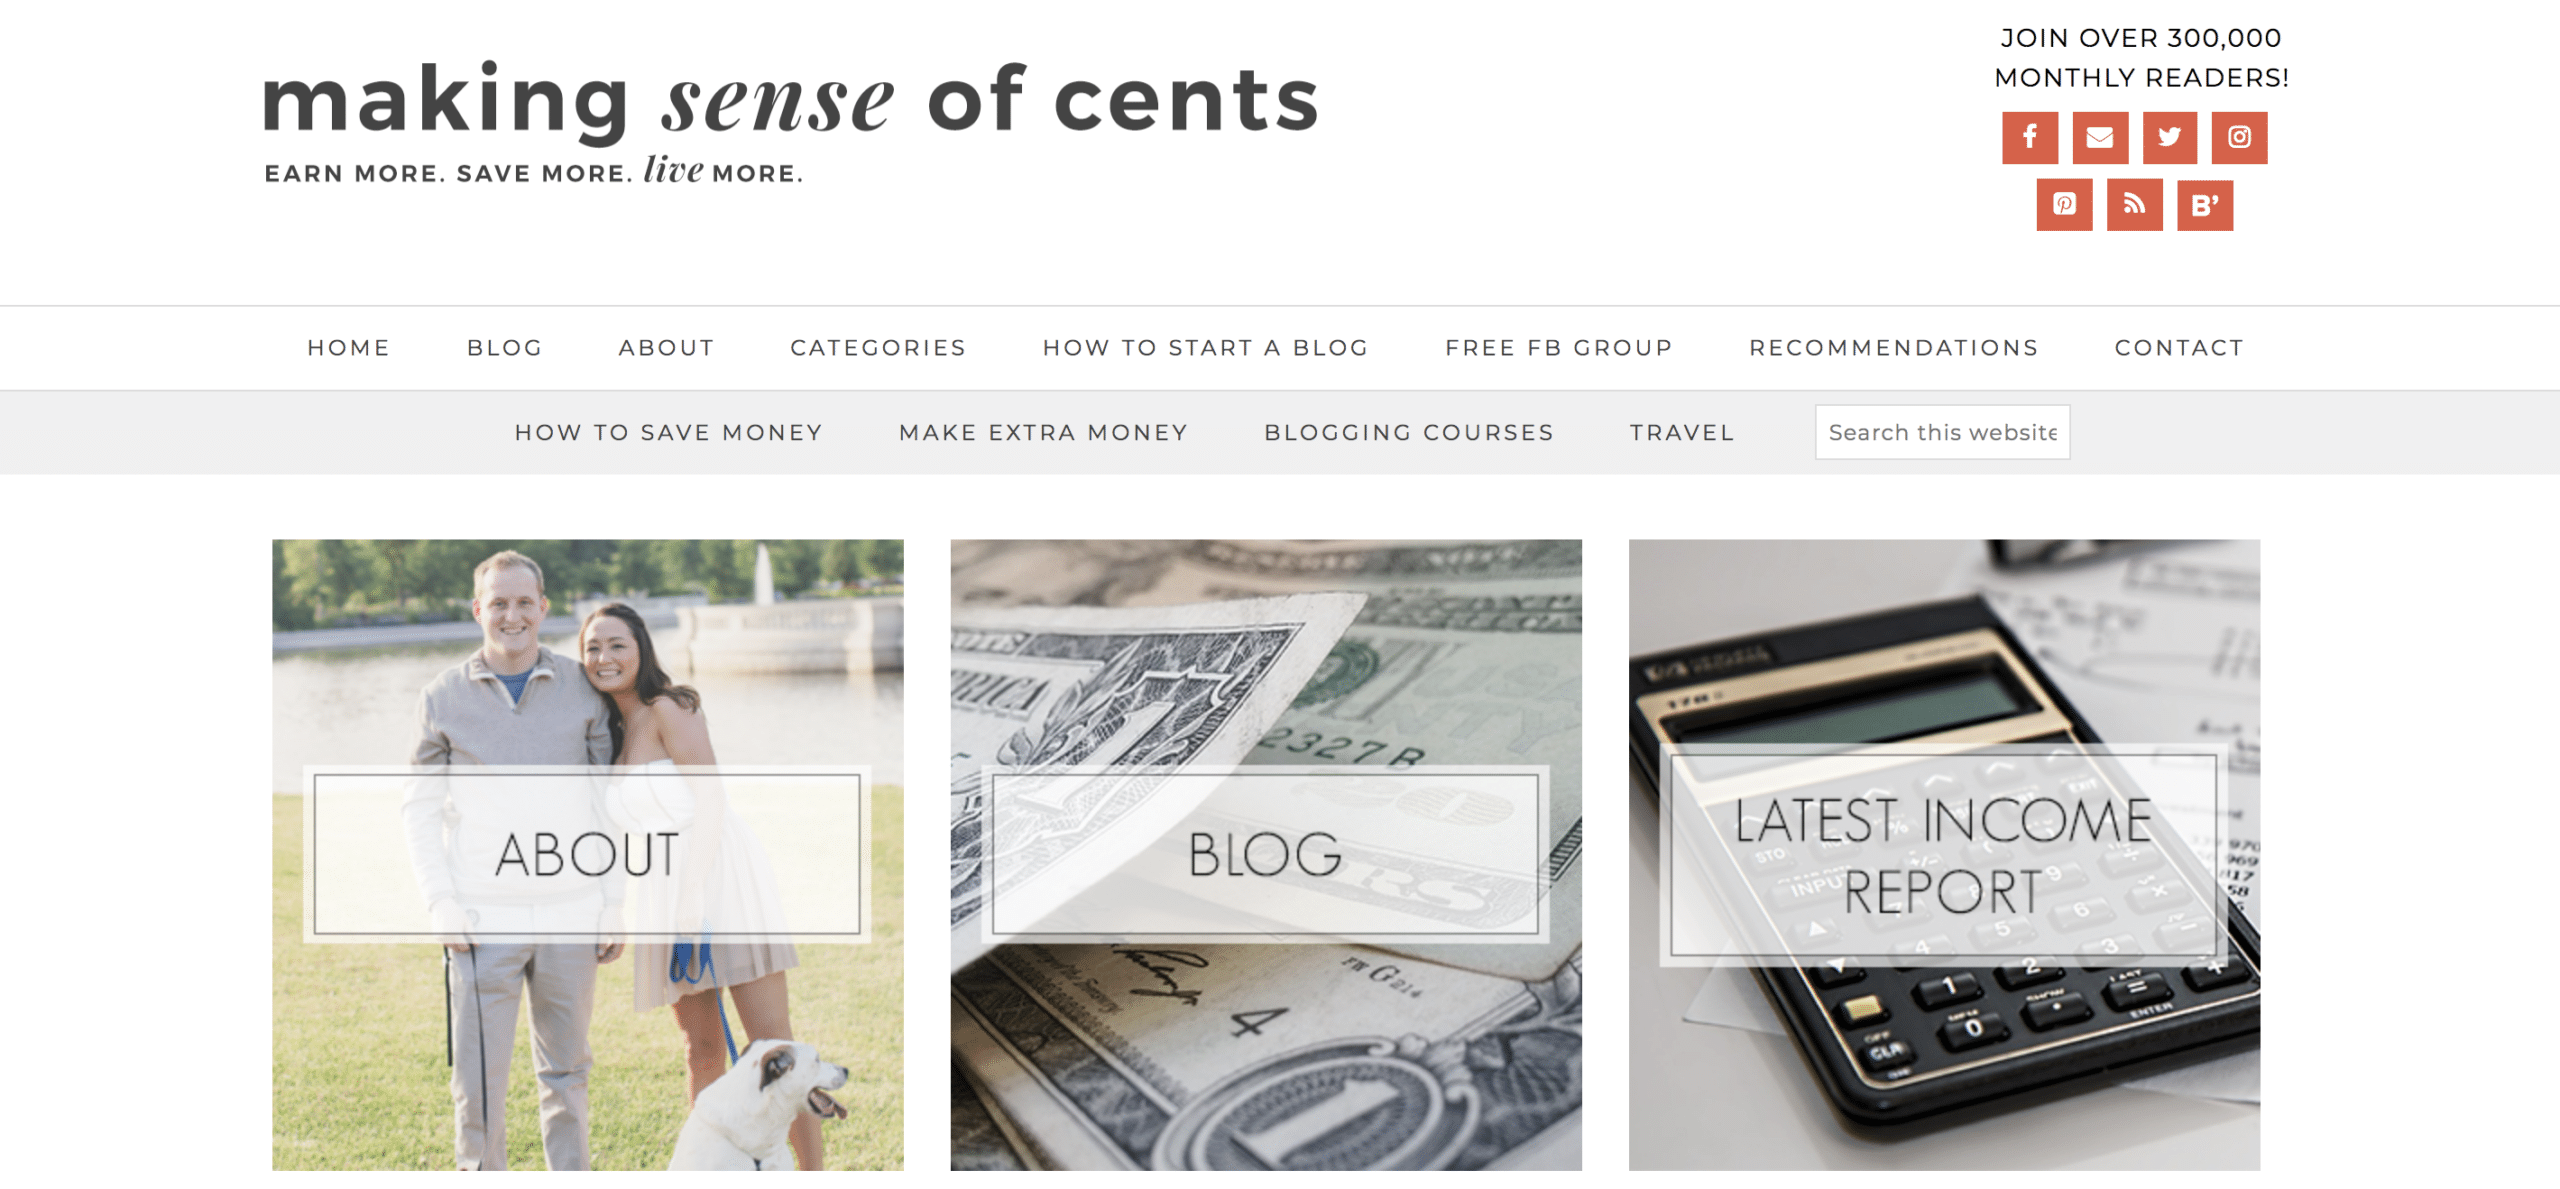 making sense of cents homepage example